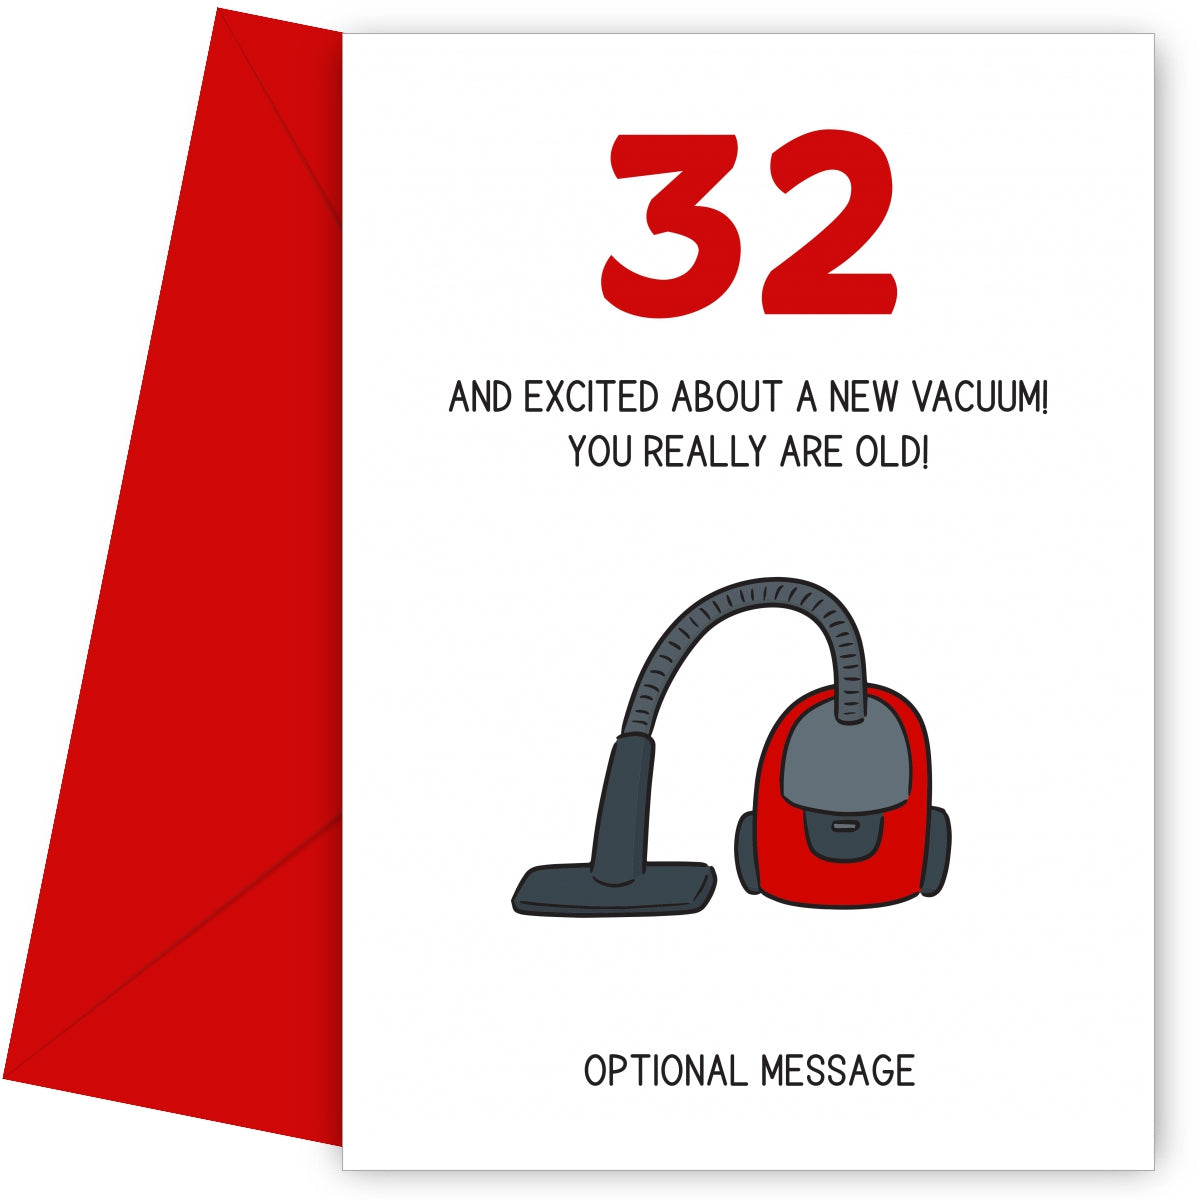 Happy 32nd Birthday Card - Excited About a New Vacuum!